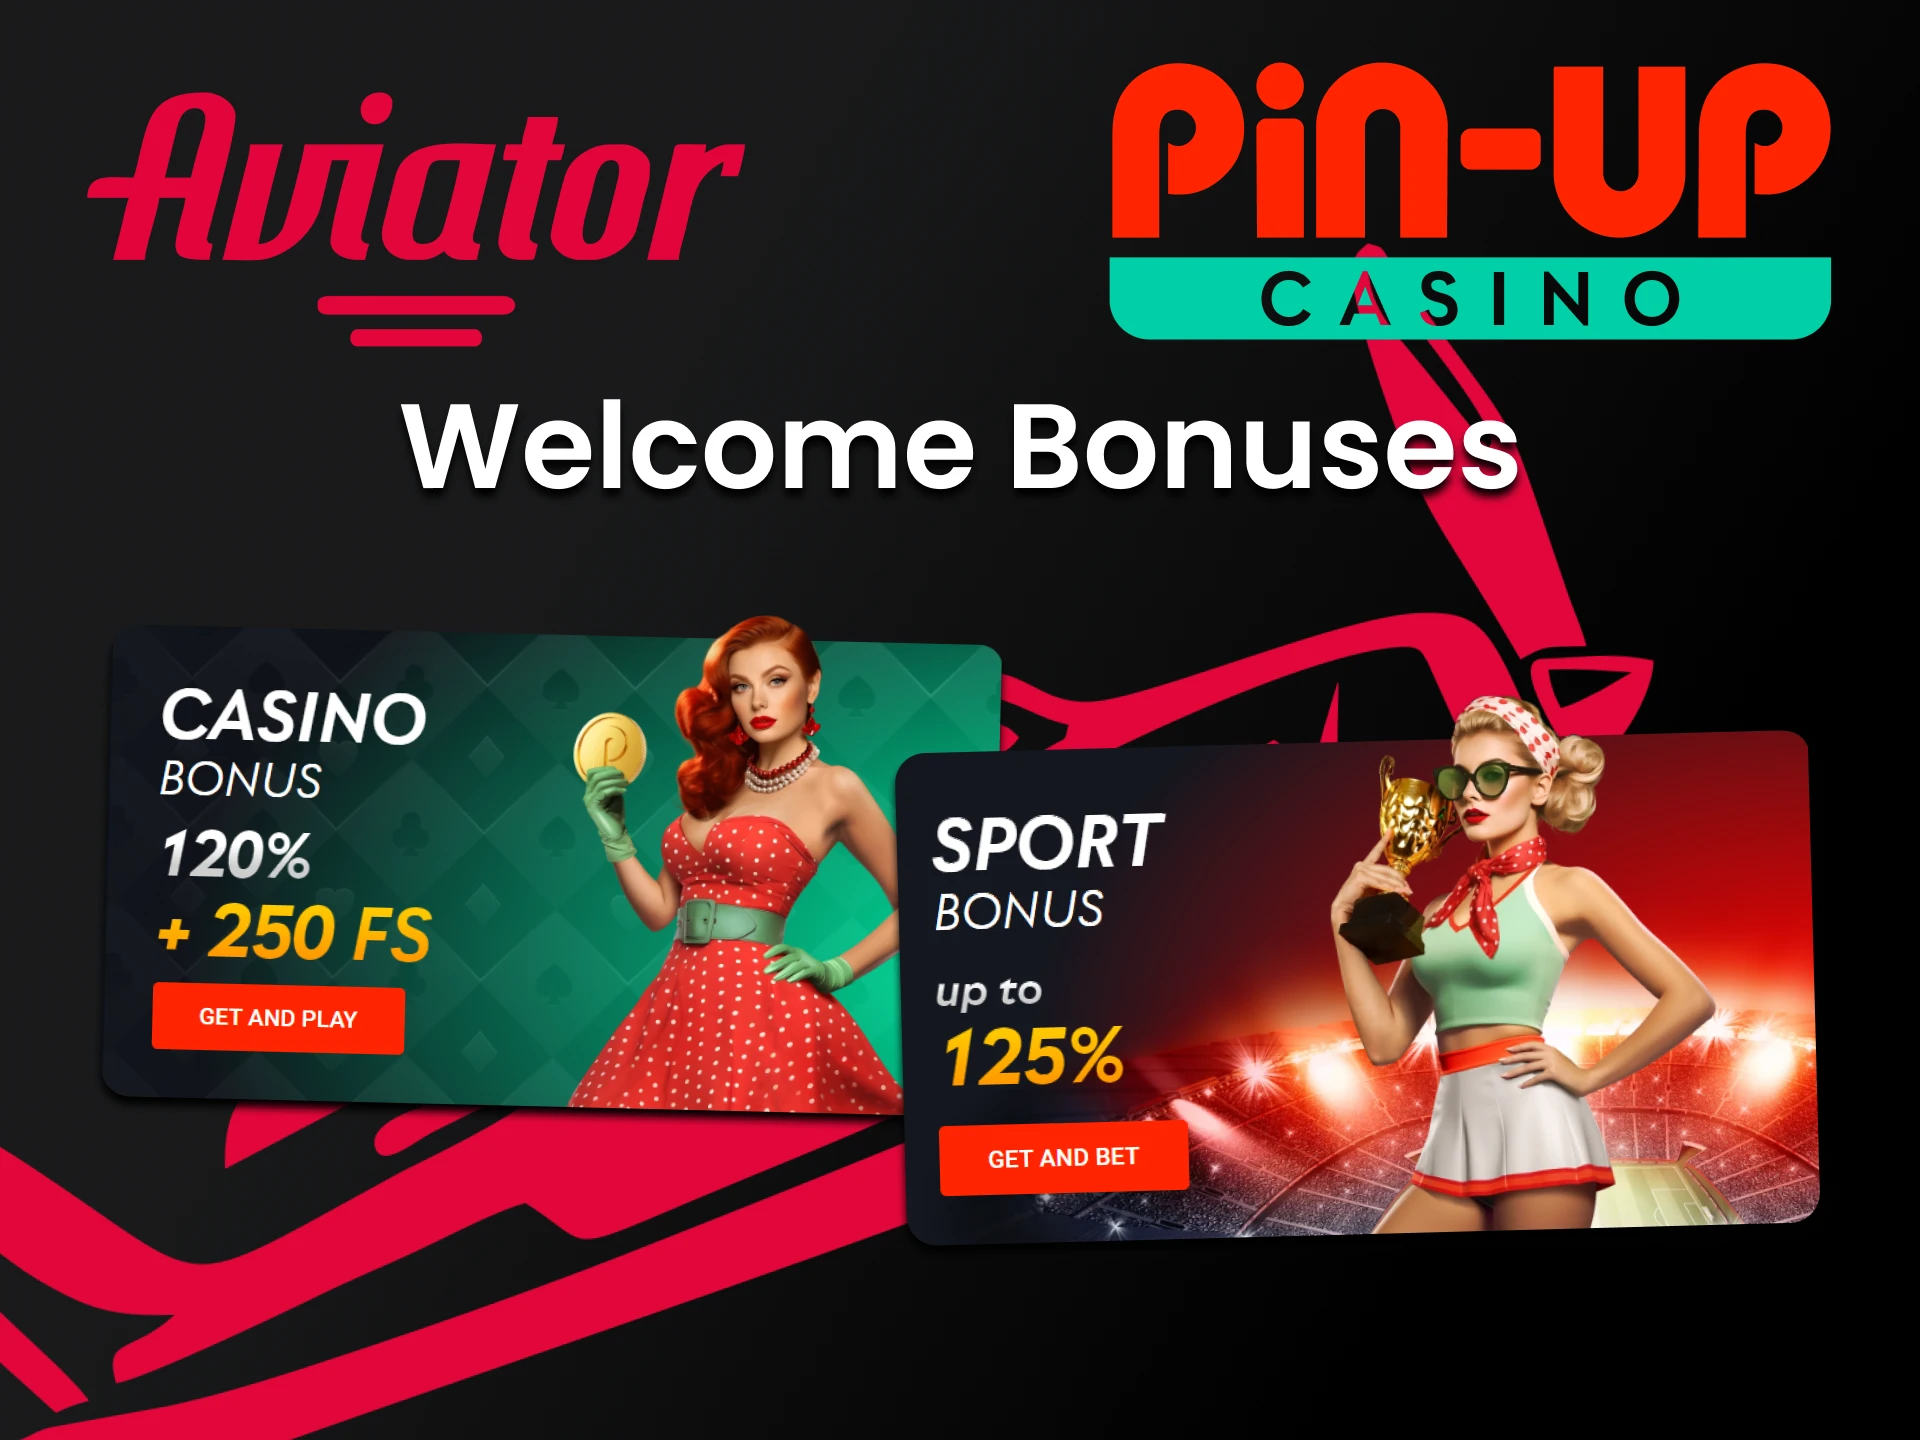 Get bonuses by playing Aviator on Pin Up.